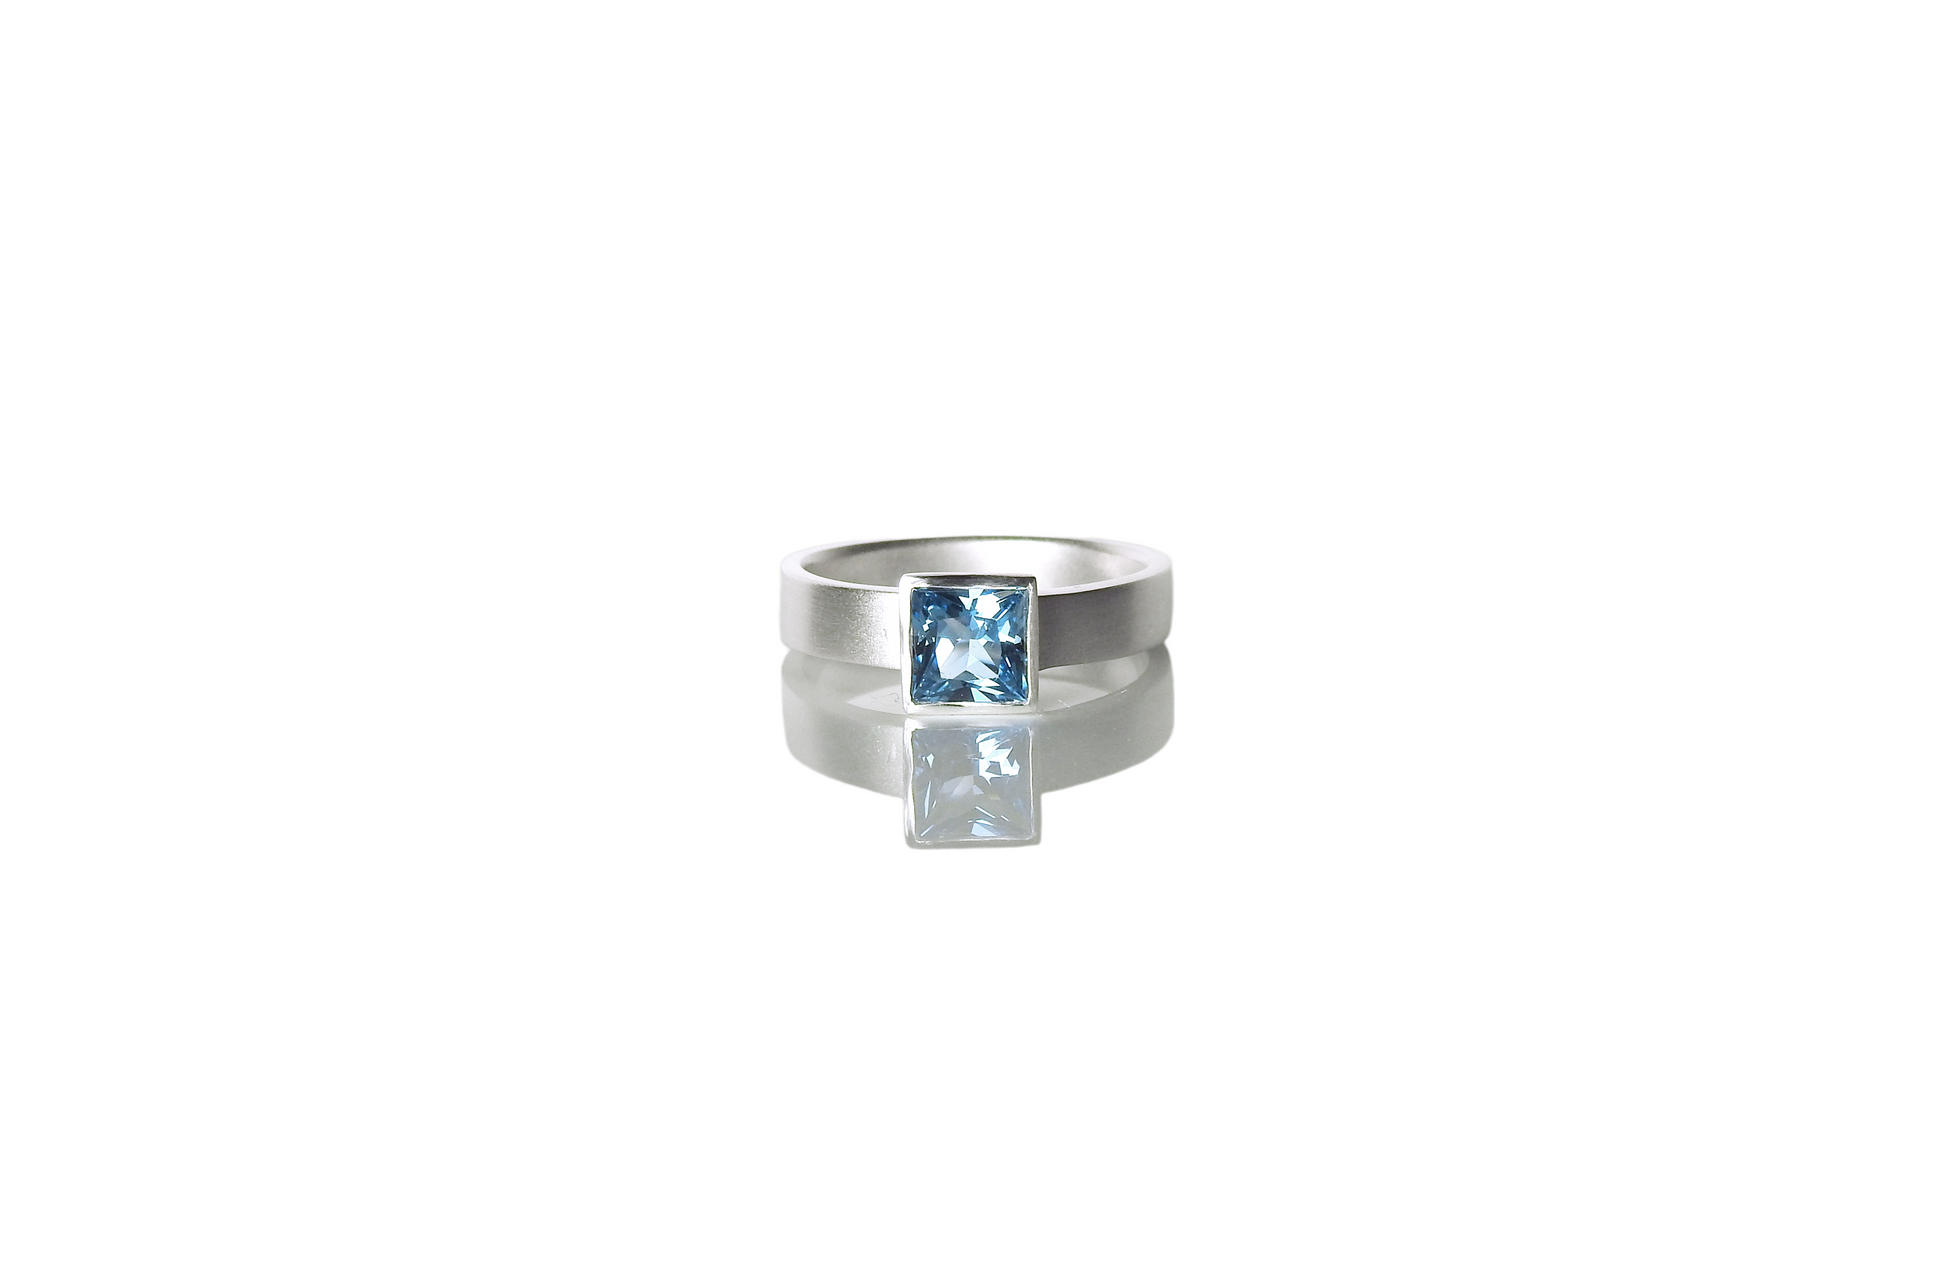 Clean, smooth square, open window bezel ring, with 5mm sky blue princess cut topaz., By ZEALmetal, Nicole Horlor, in Kingston, ON, Canada